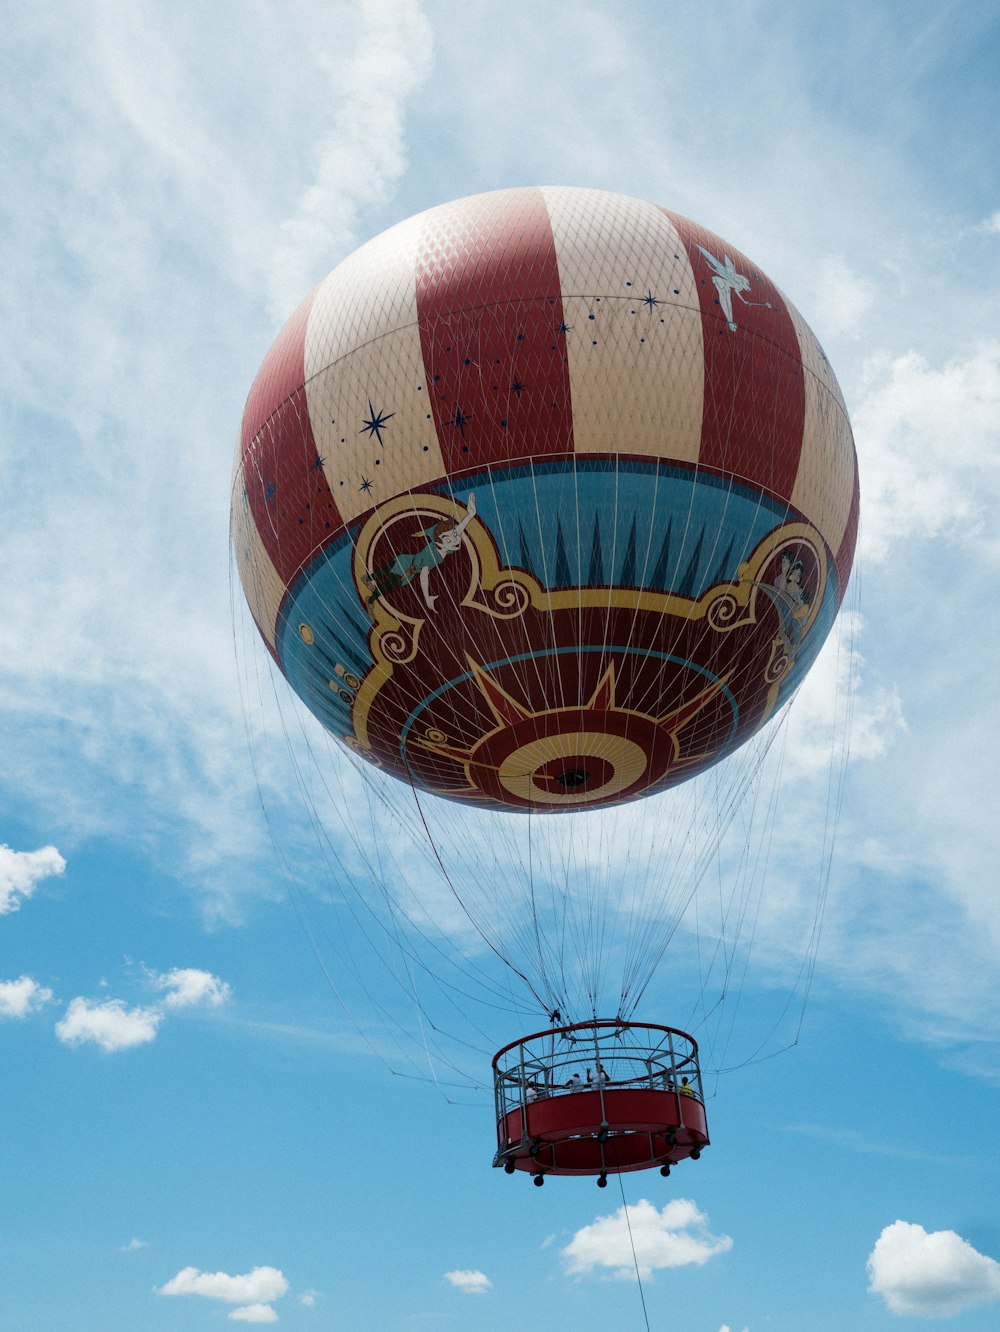 brown and beige hot air ballooning during daytime